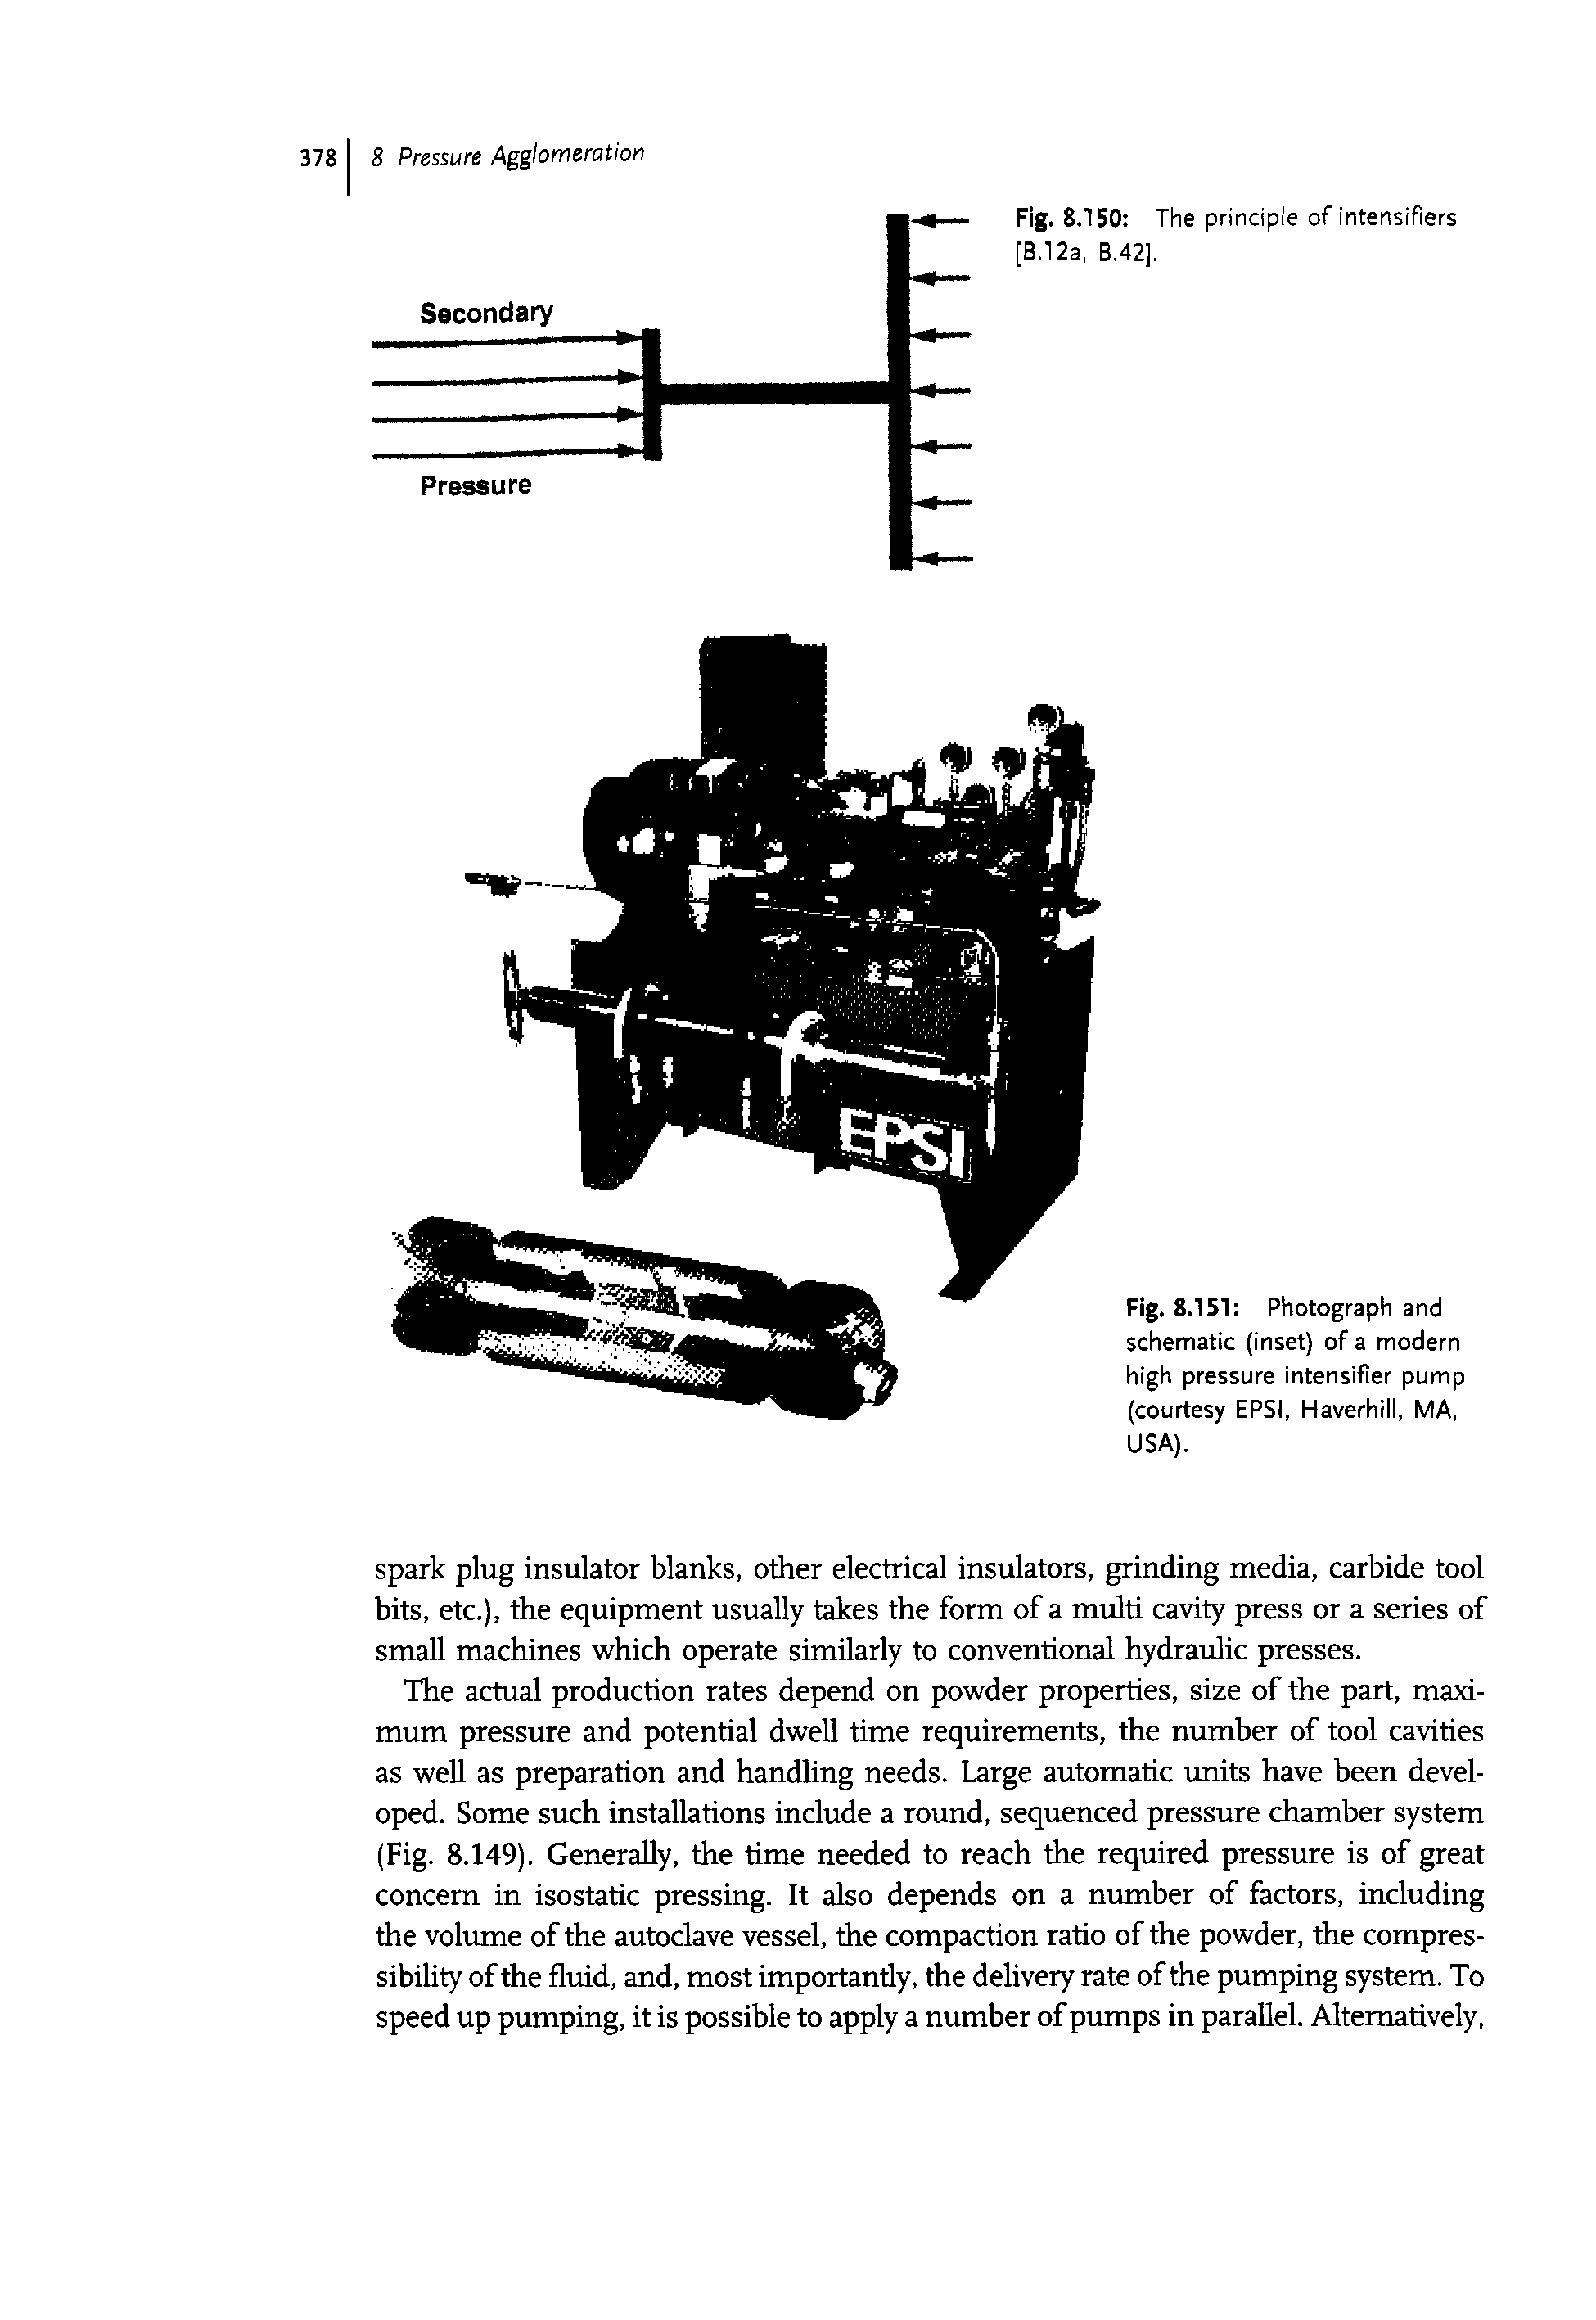 Fig. 8.151 Photograph and schematic (inset) of a modern high pressure intensifier pump (courtesy EPSI, Haverhili, MA. USA).